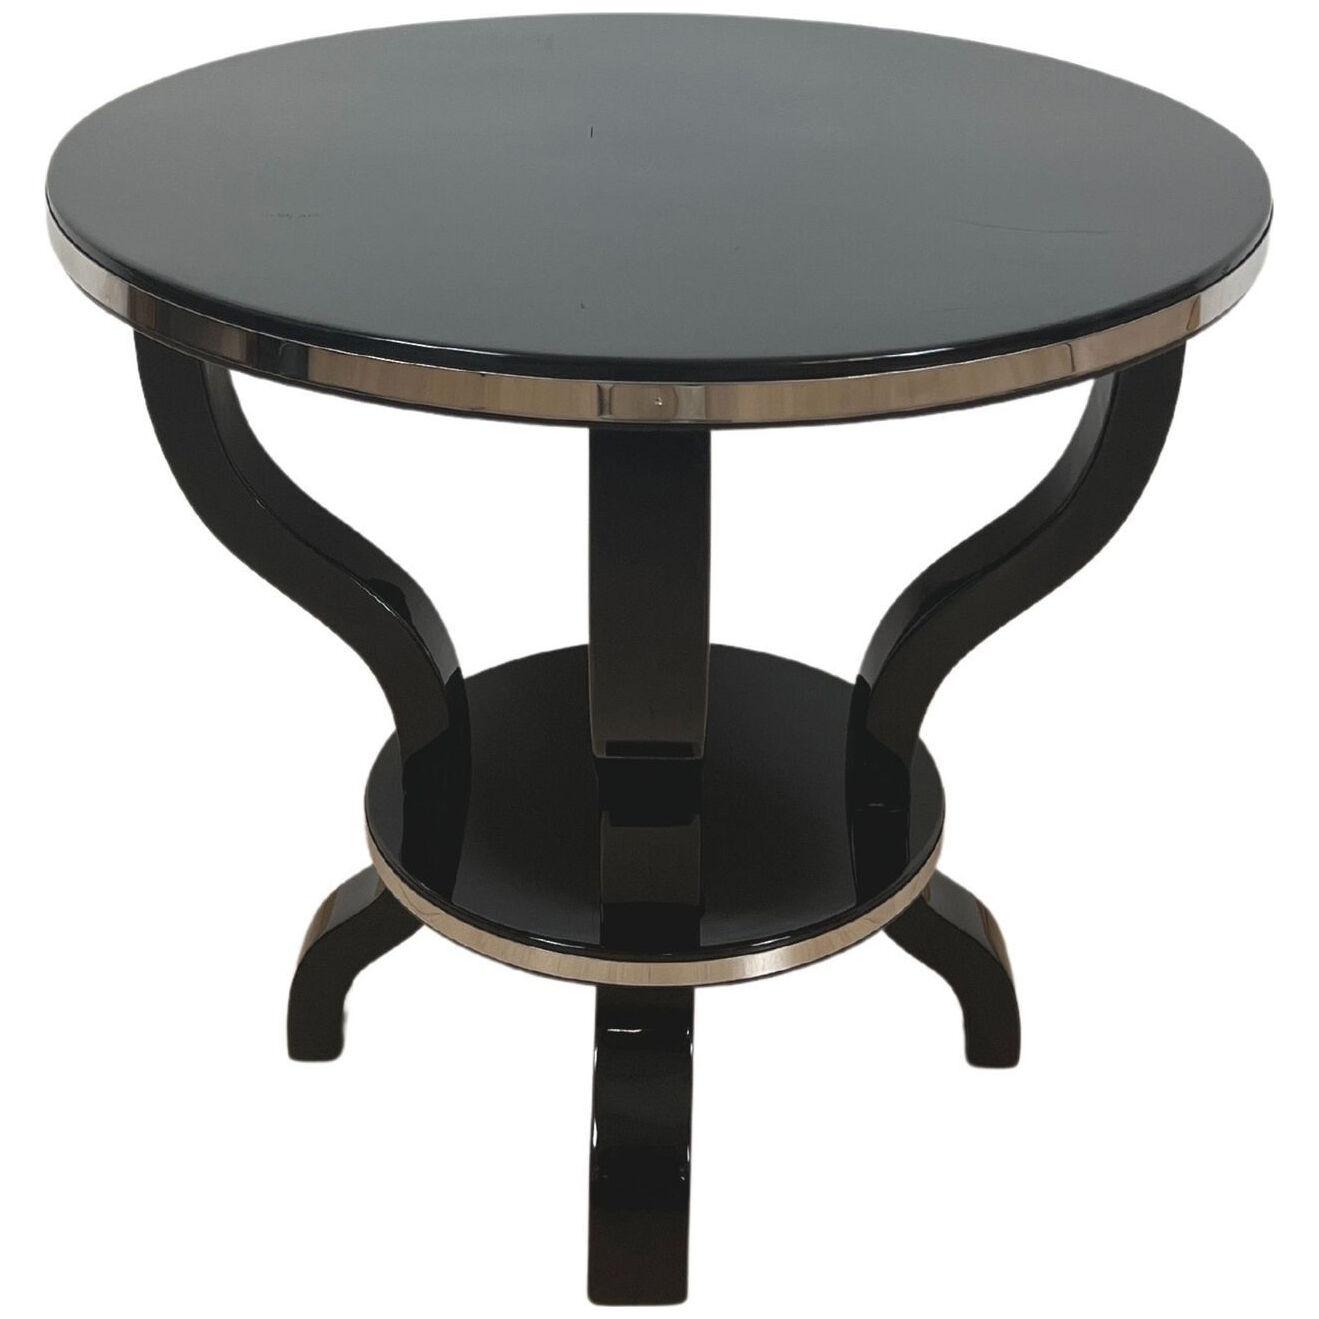 Art Deco Gueridon or Side Table, Black Lacquer and Metal, France circa 193